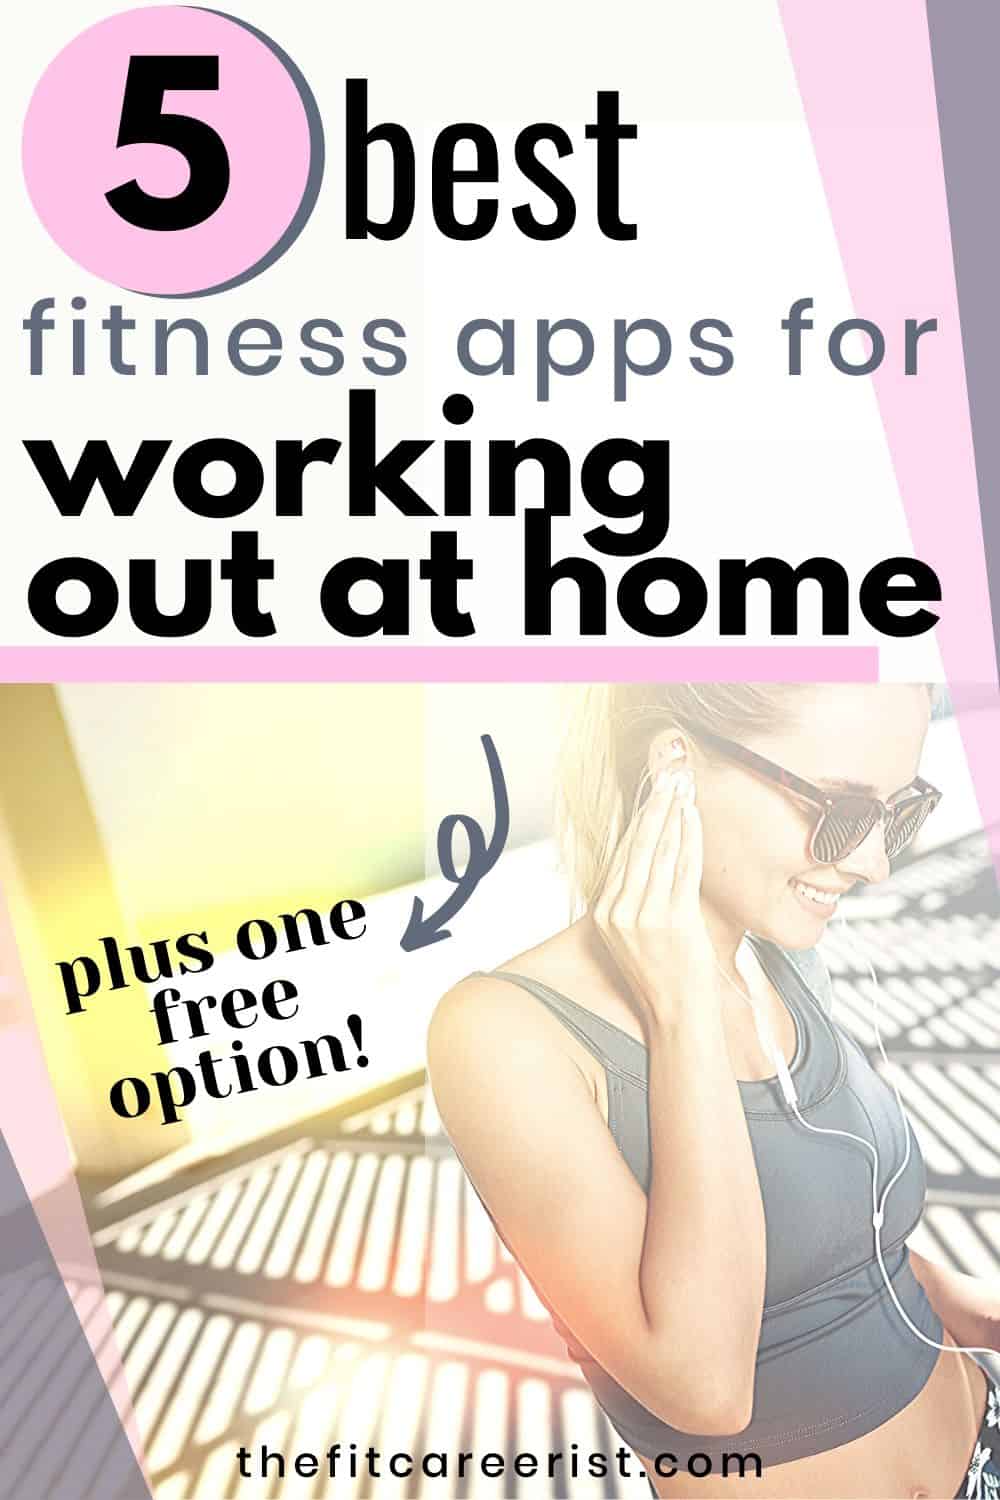 5 best fitness apps for working out at home